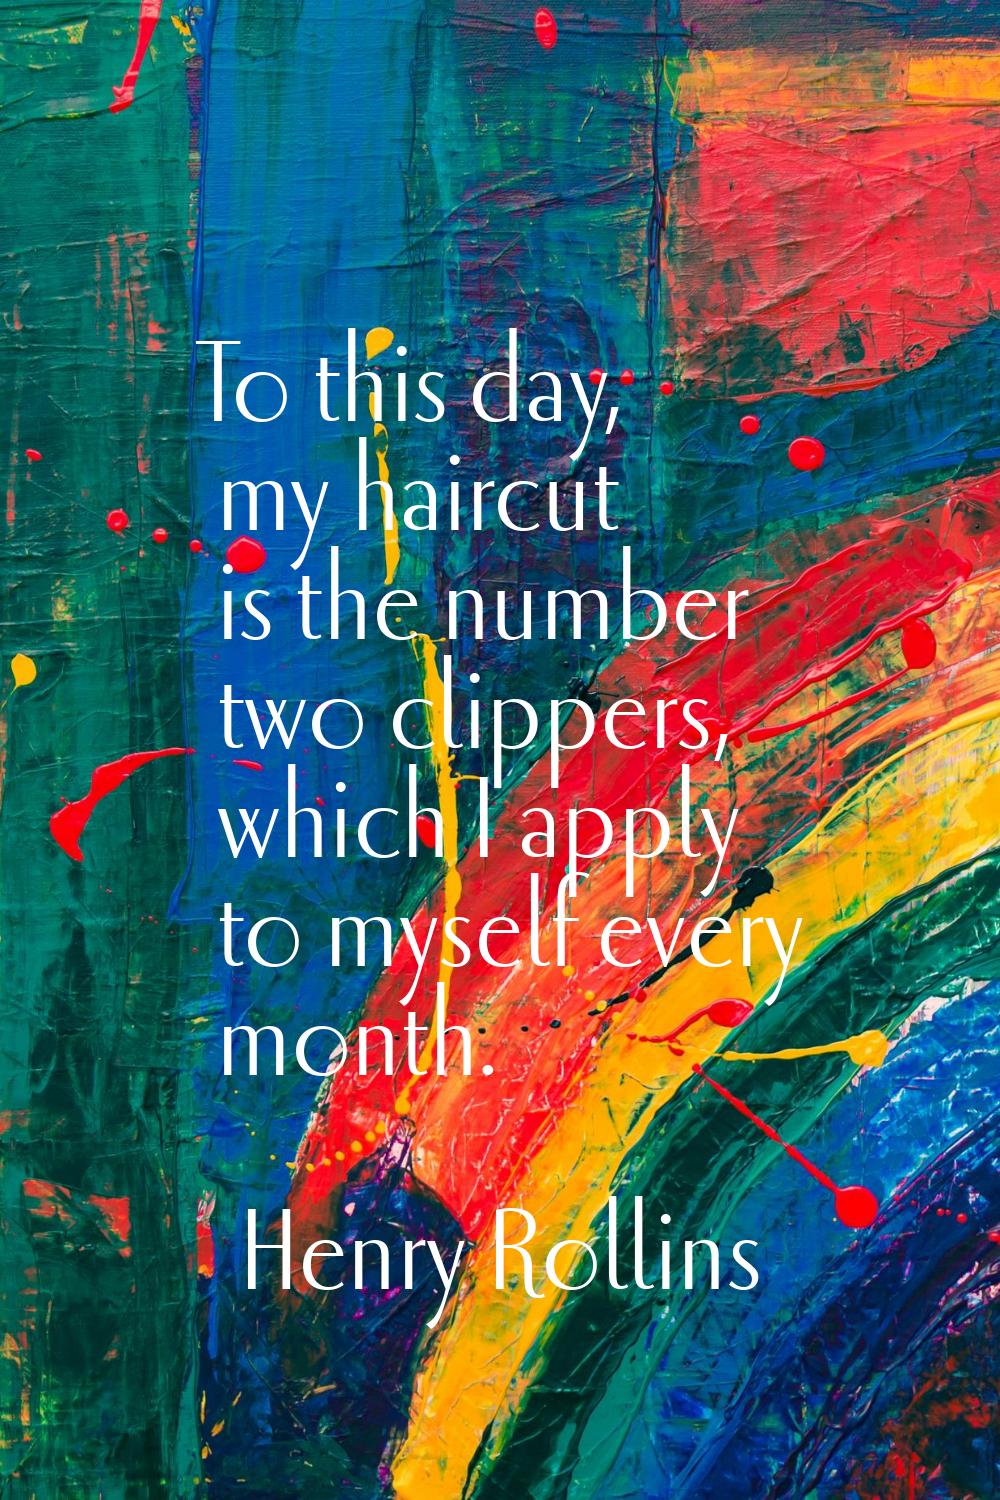 To this day, my haircut is the number two clippers, which I apply to myself every month.